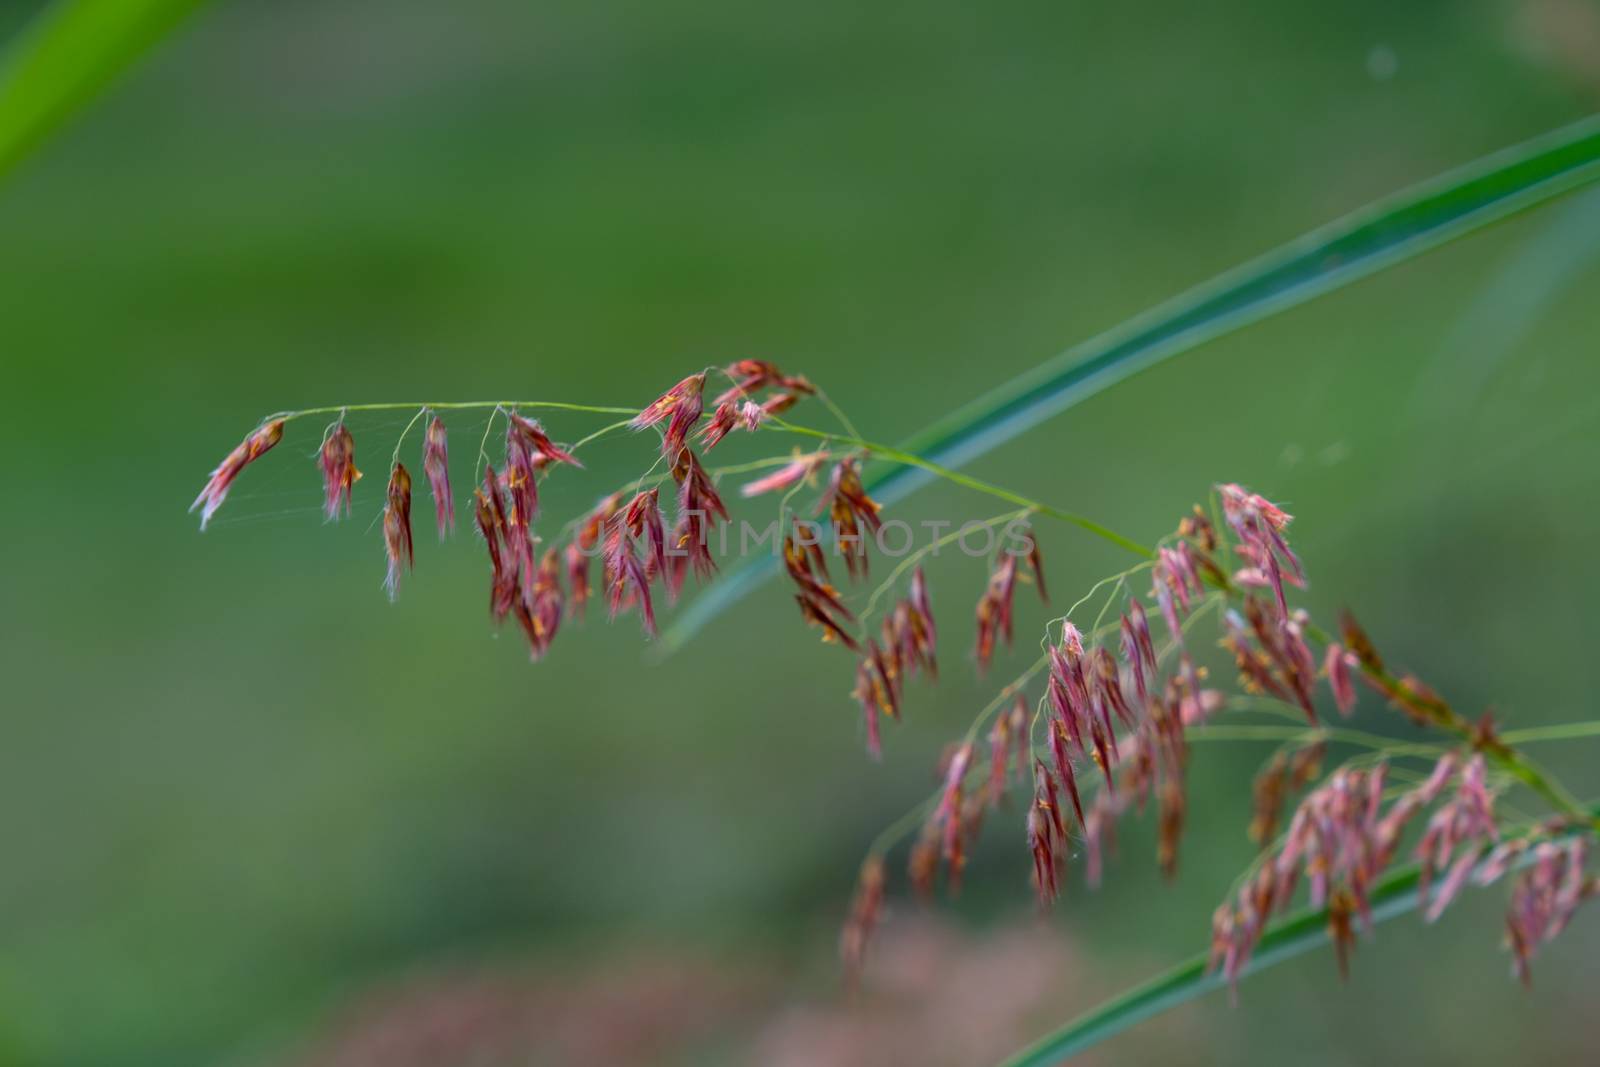 The Select focus of grass flower with blur background